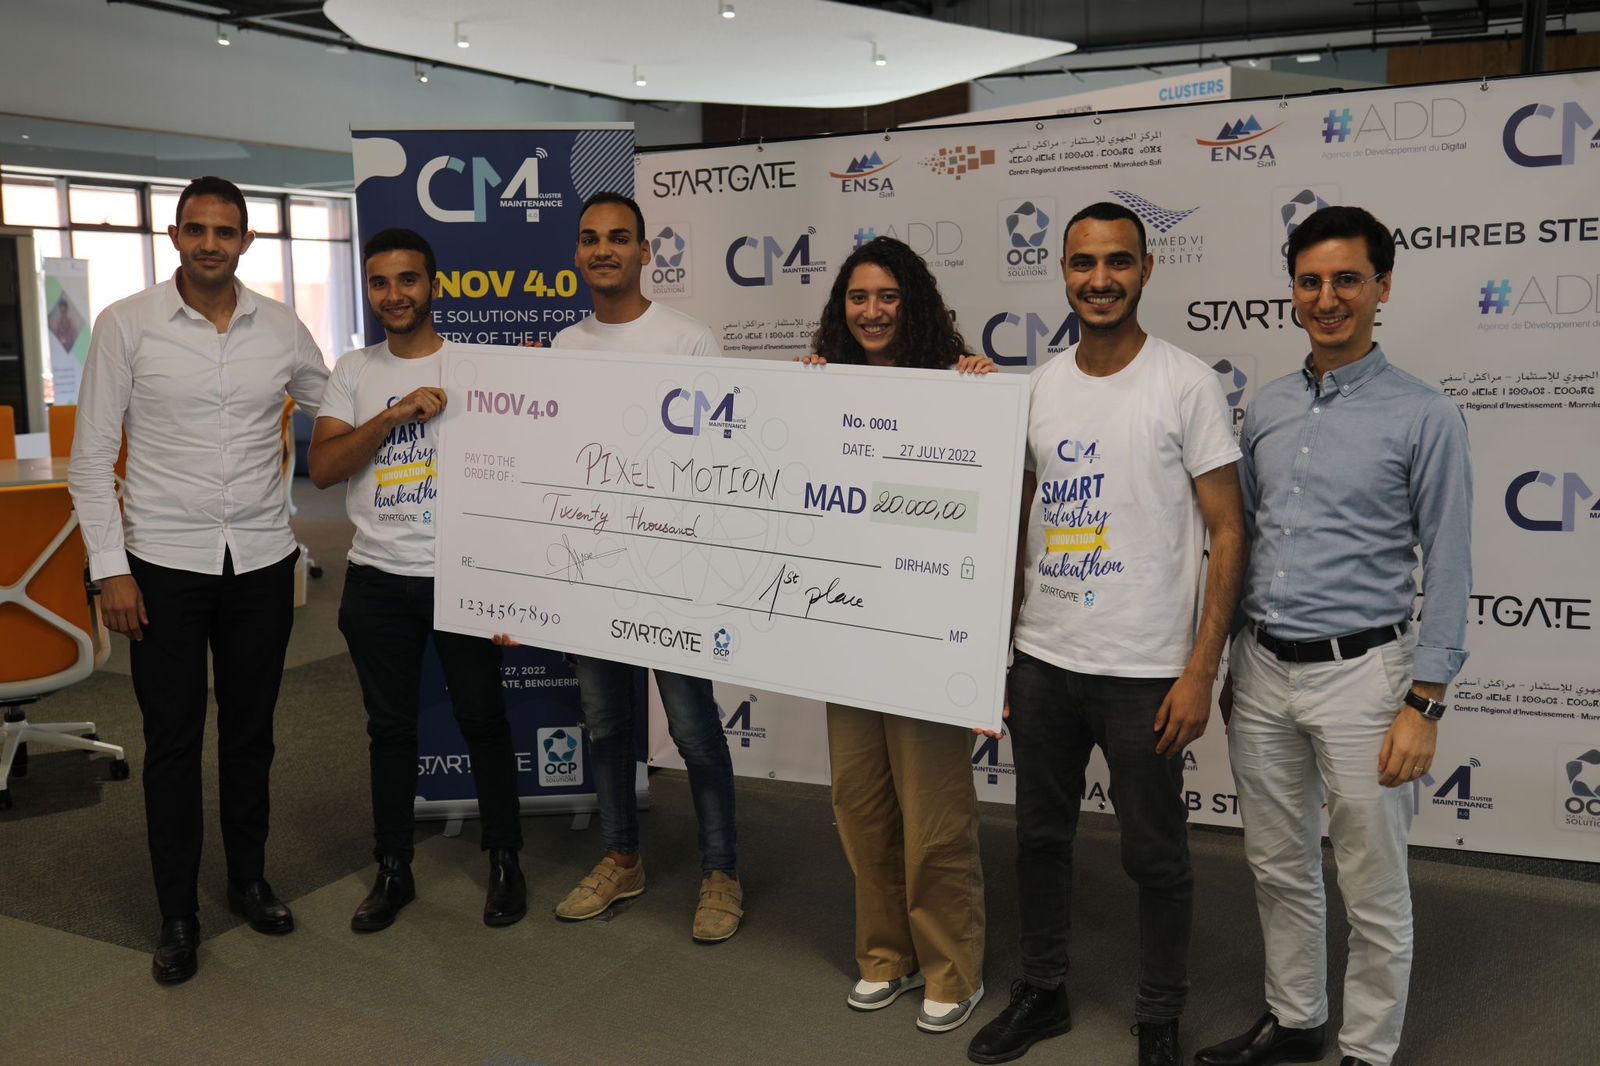 Winners of the Innov 4.0 hackathon organized by cluster maintenance 4.0